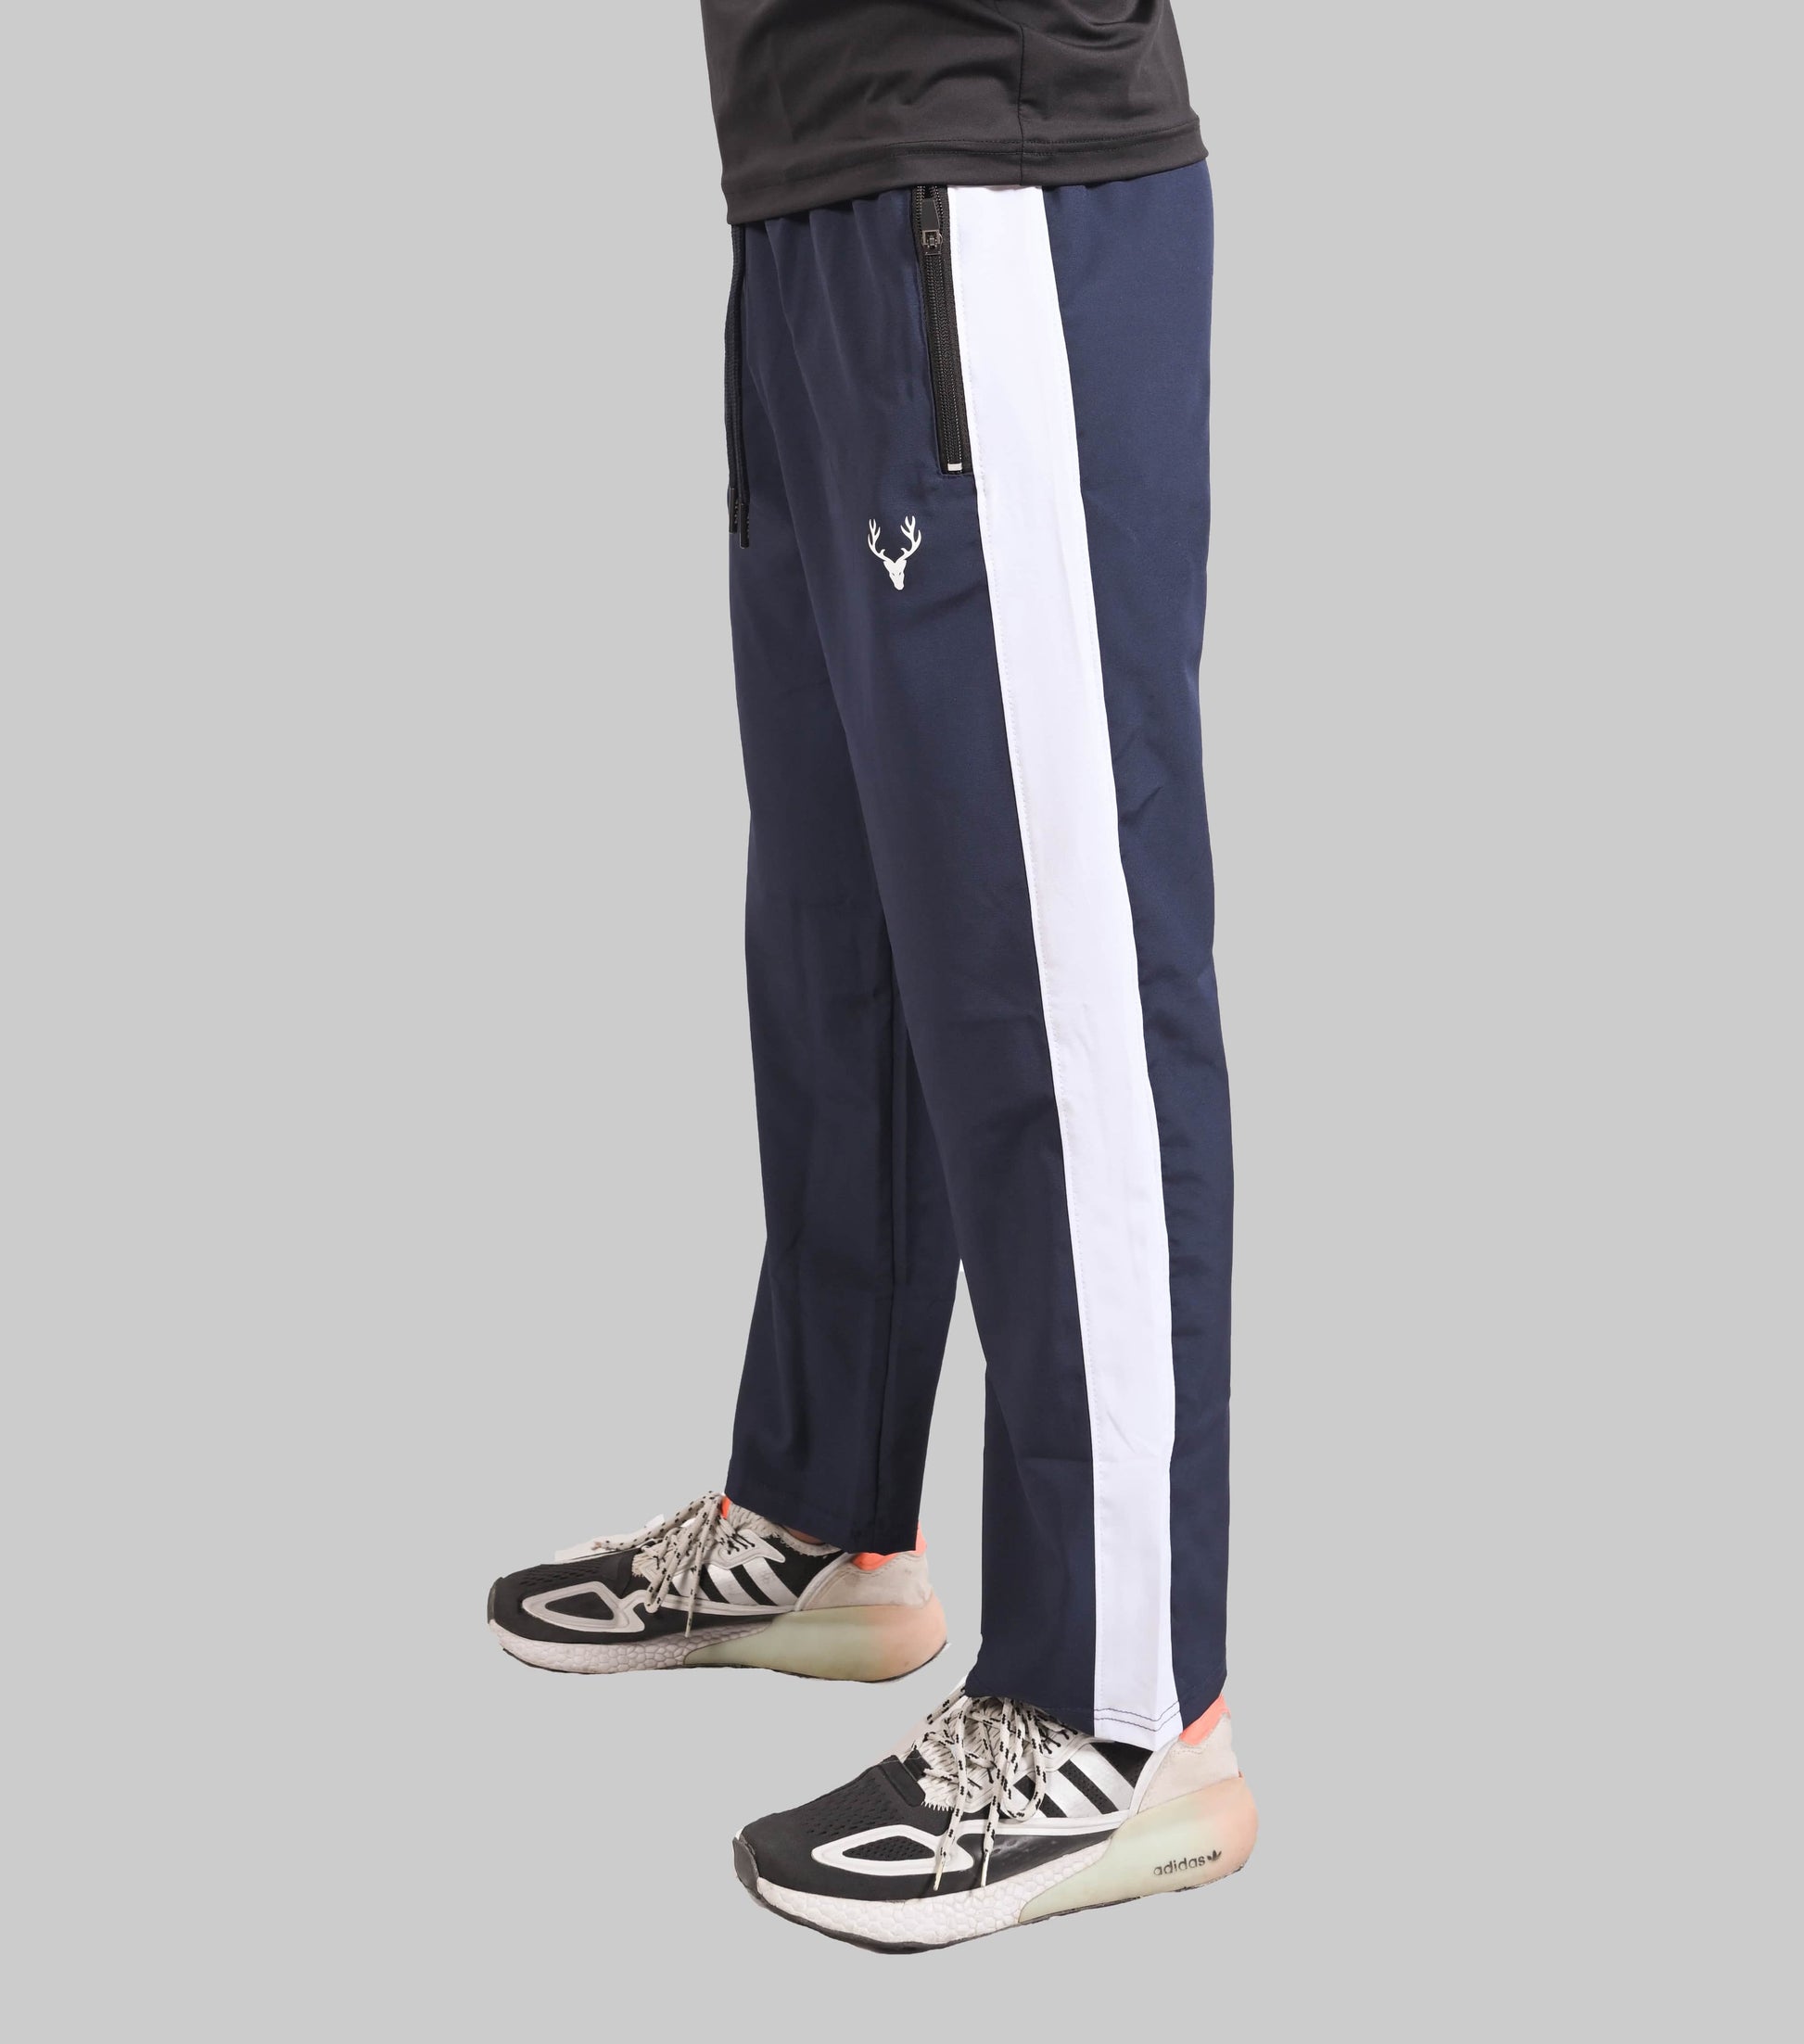 SG Loose Fit Trouser 2.0 (NAVY BLUE & WHITE) - Stag Clothing 